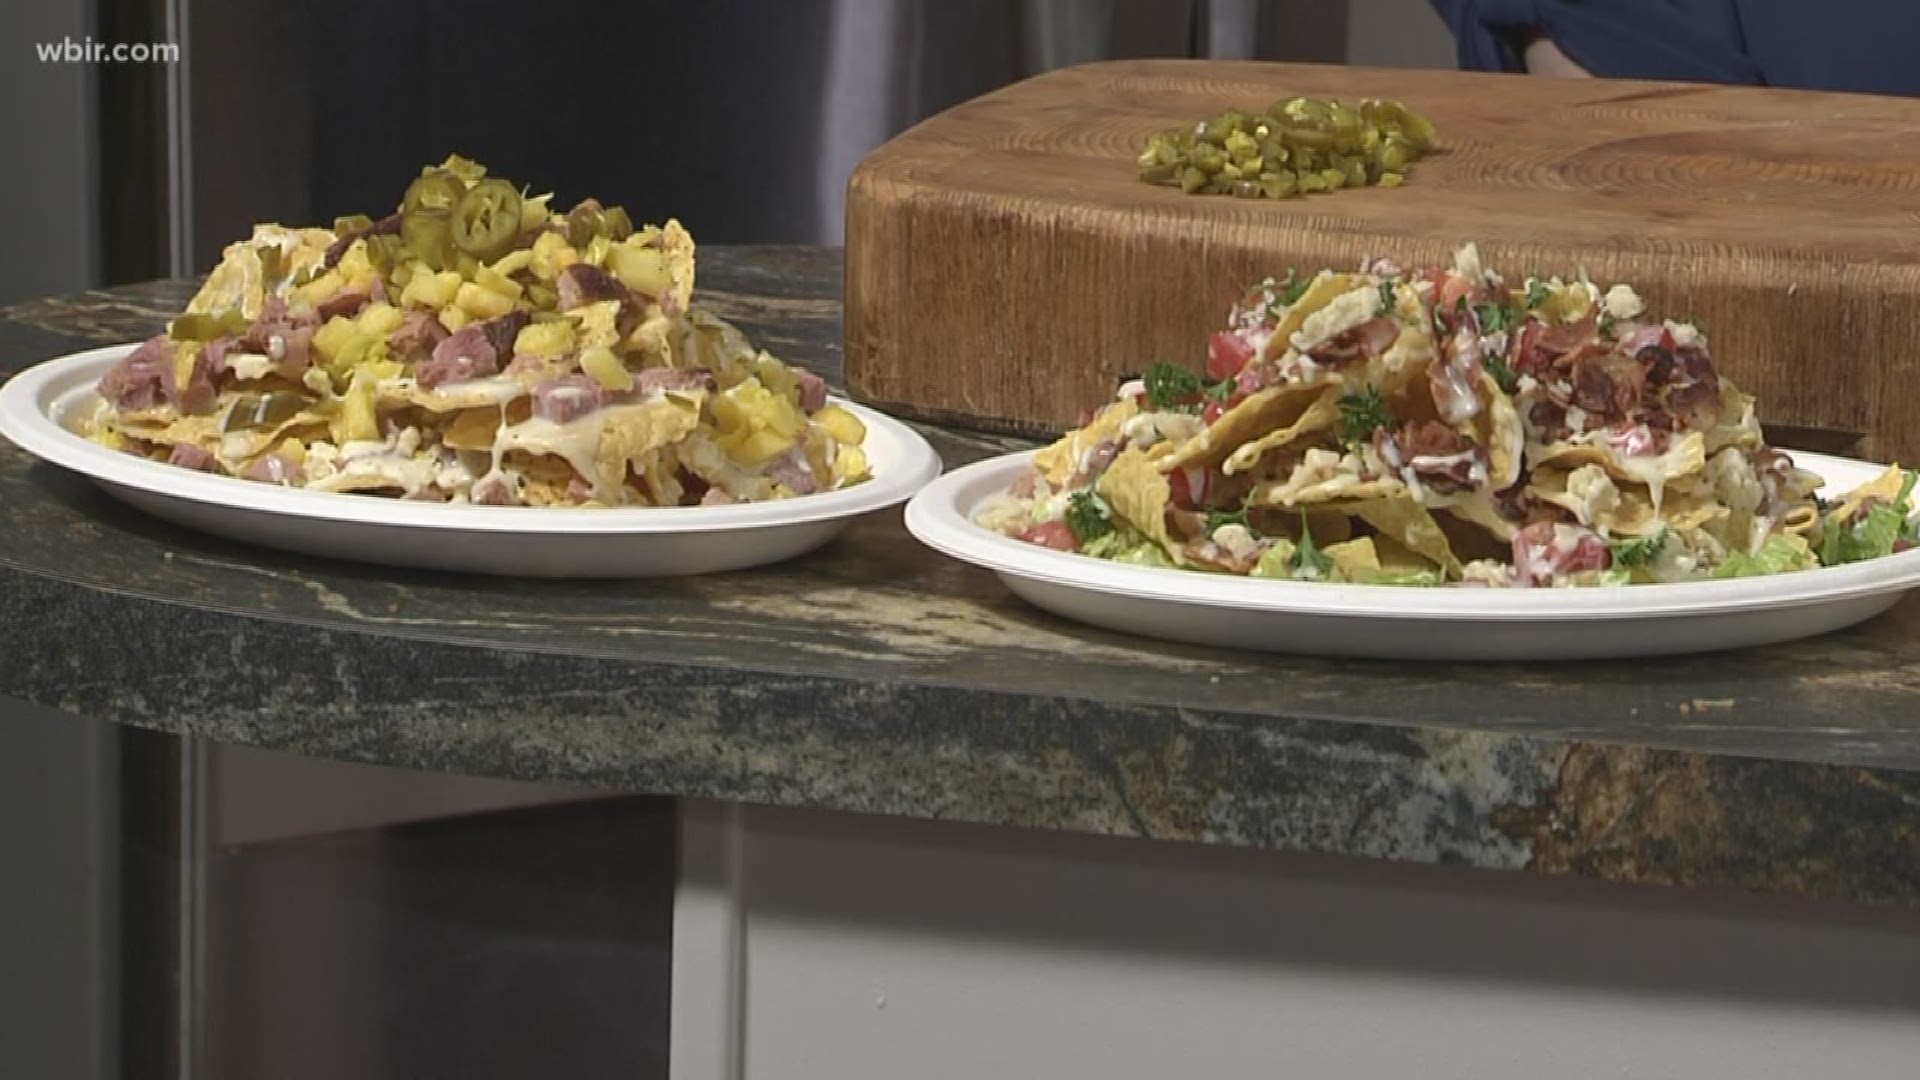 Kim Wilcox from It's All So Yummy Cafe is in the kitchen with us to make game-day nachos!